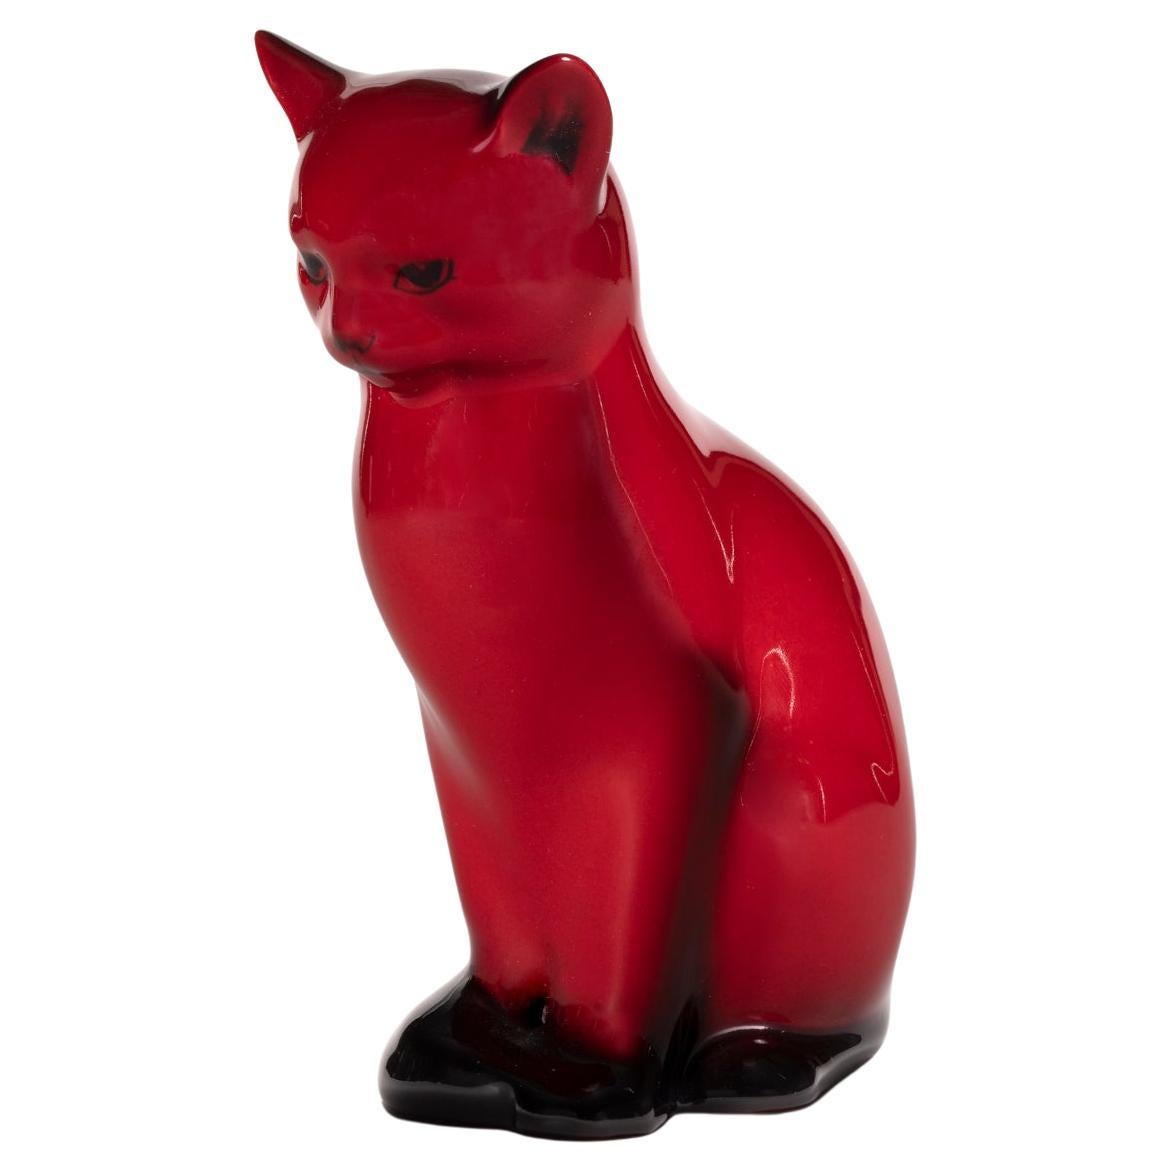 Royal Doulton Red Flambe Porcelain Figurine "CAT" For Sale